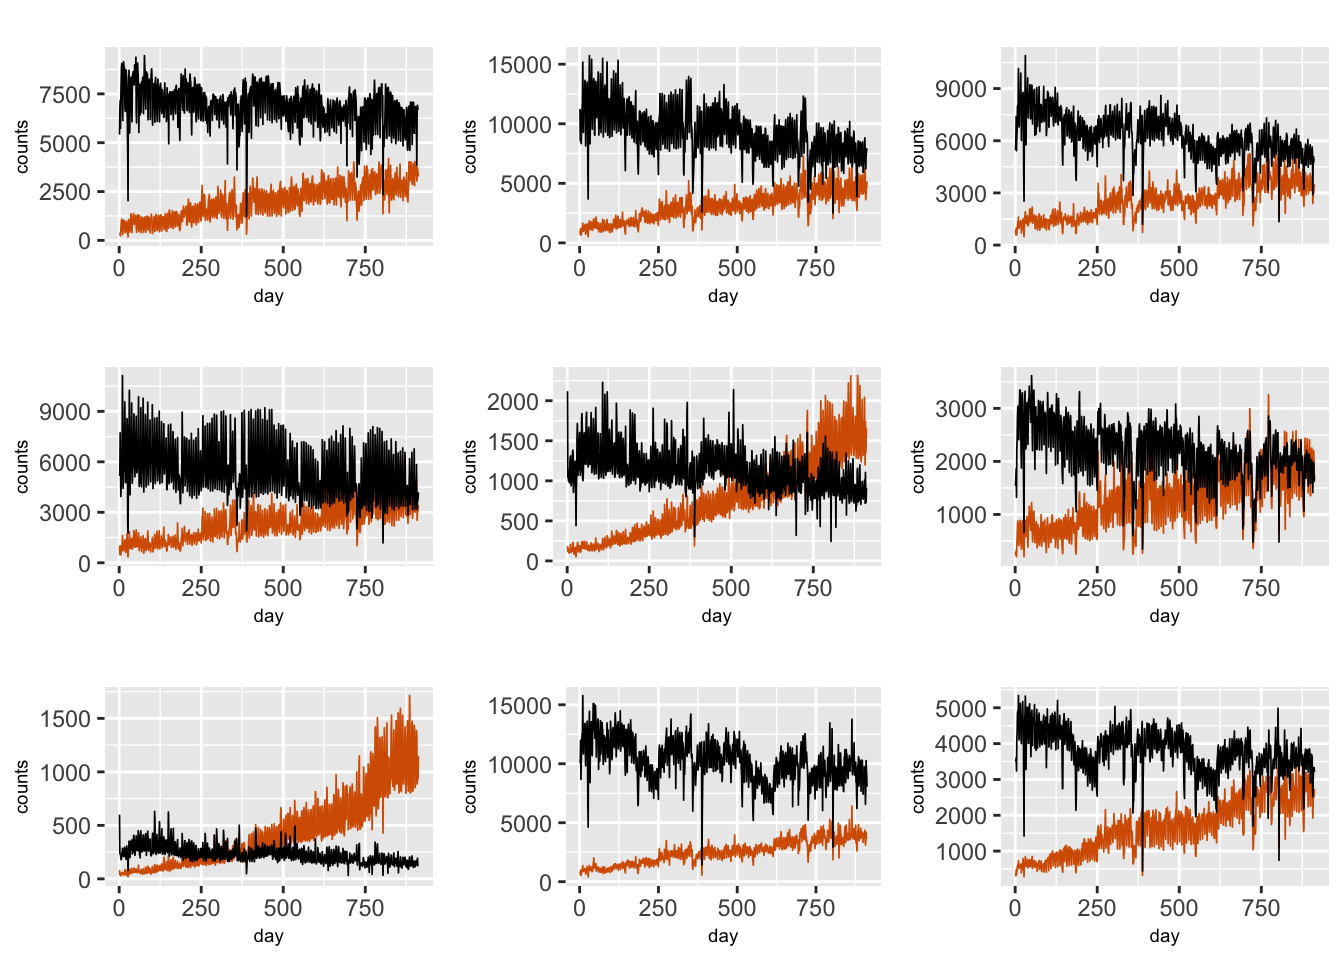 Time series plots of daily TNC (red) and Taxi (black) counts in nine different taxi zones in Manhattan.